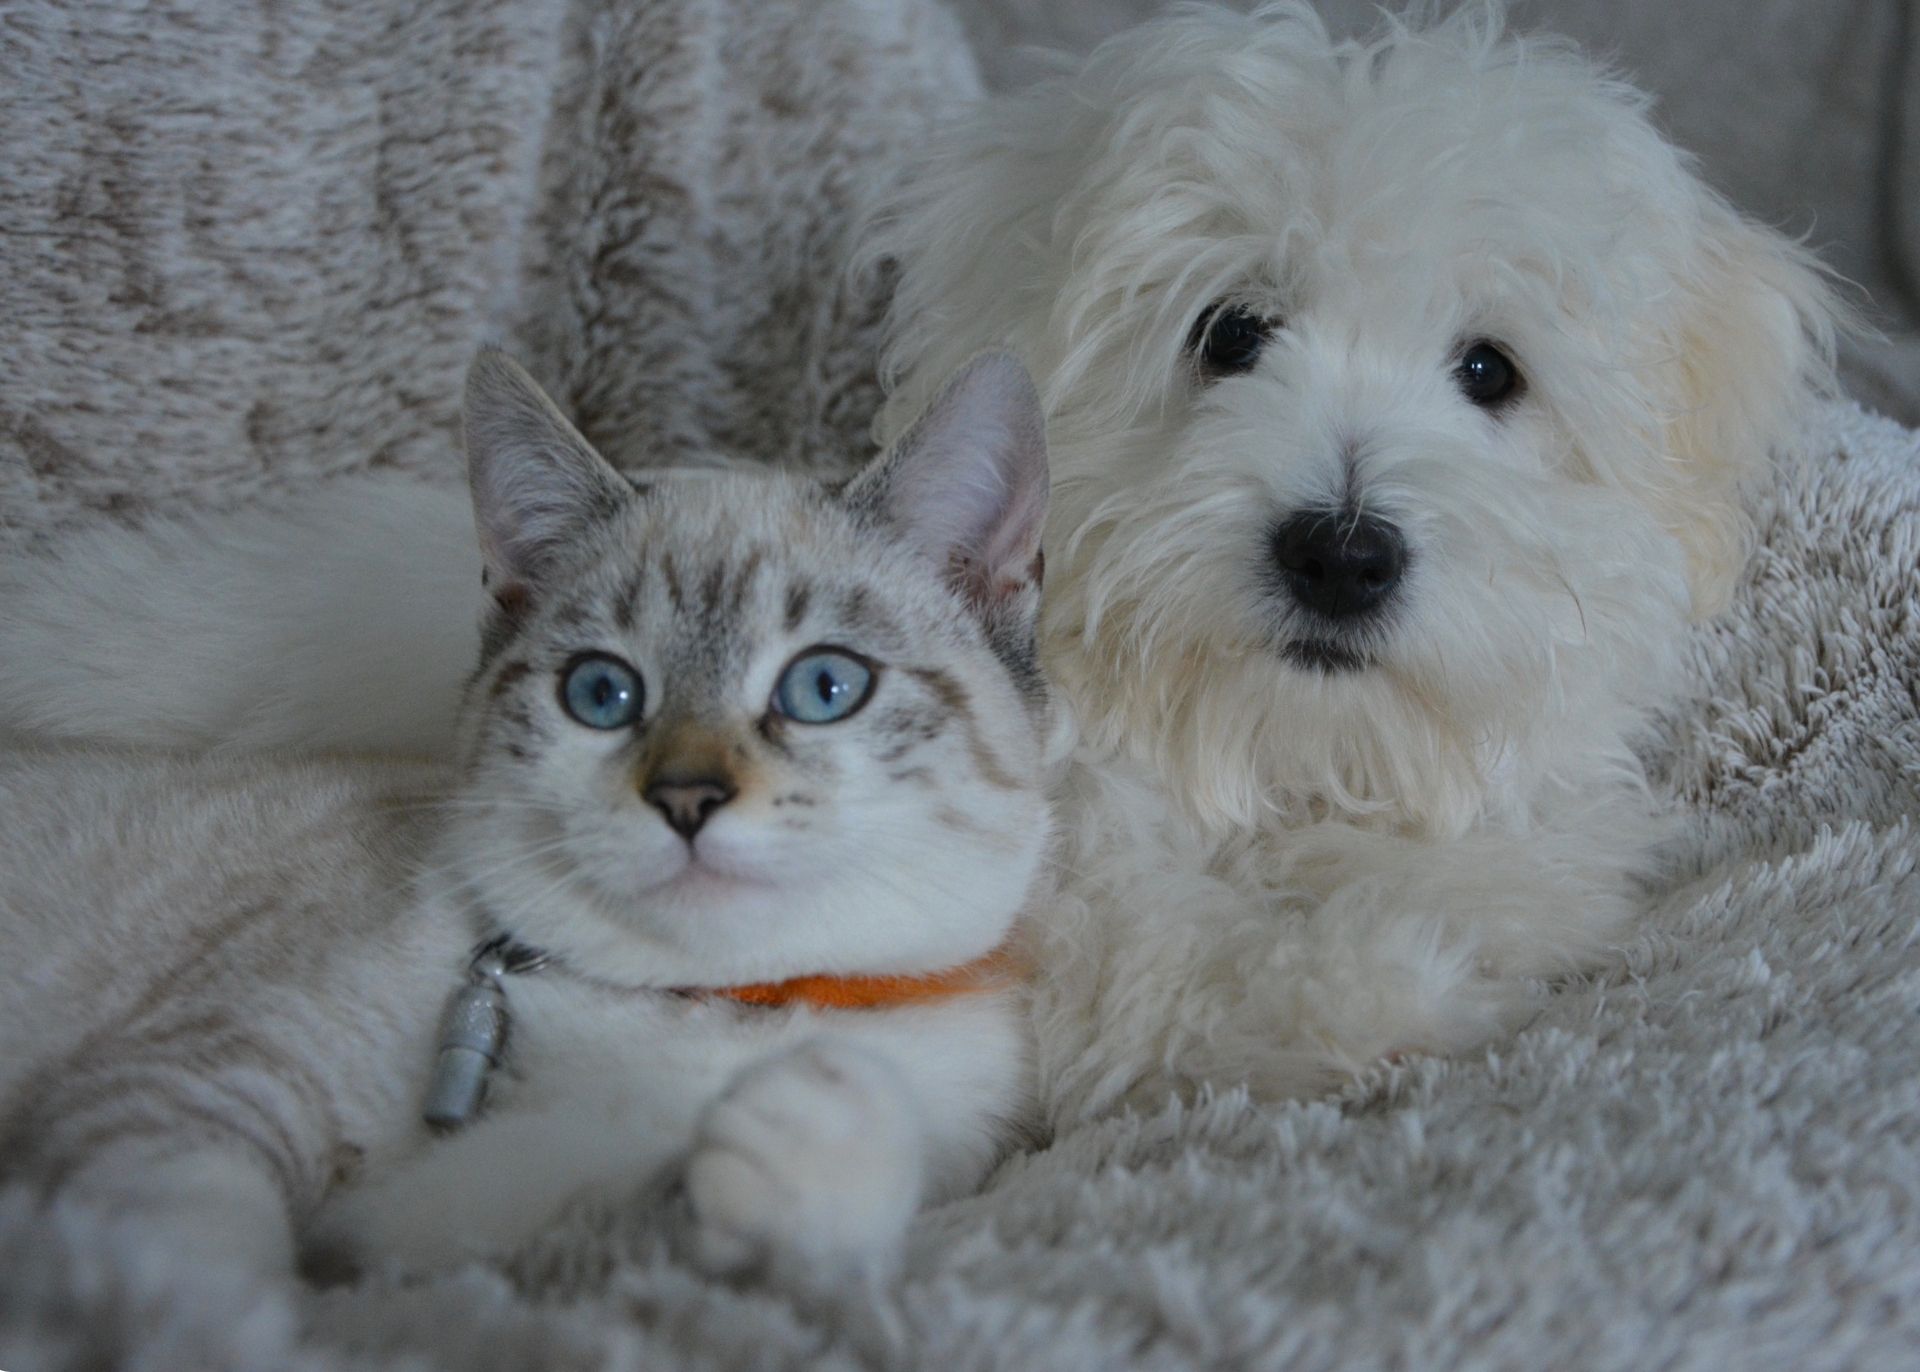 Cream and grey cat with green eyes cuddling with white small breed dog